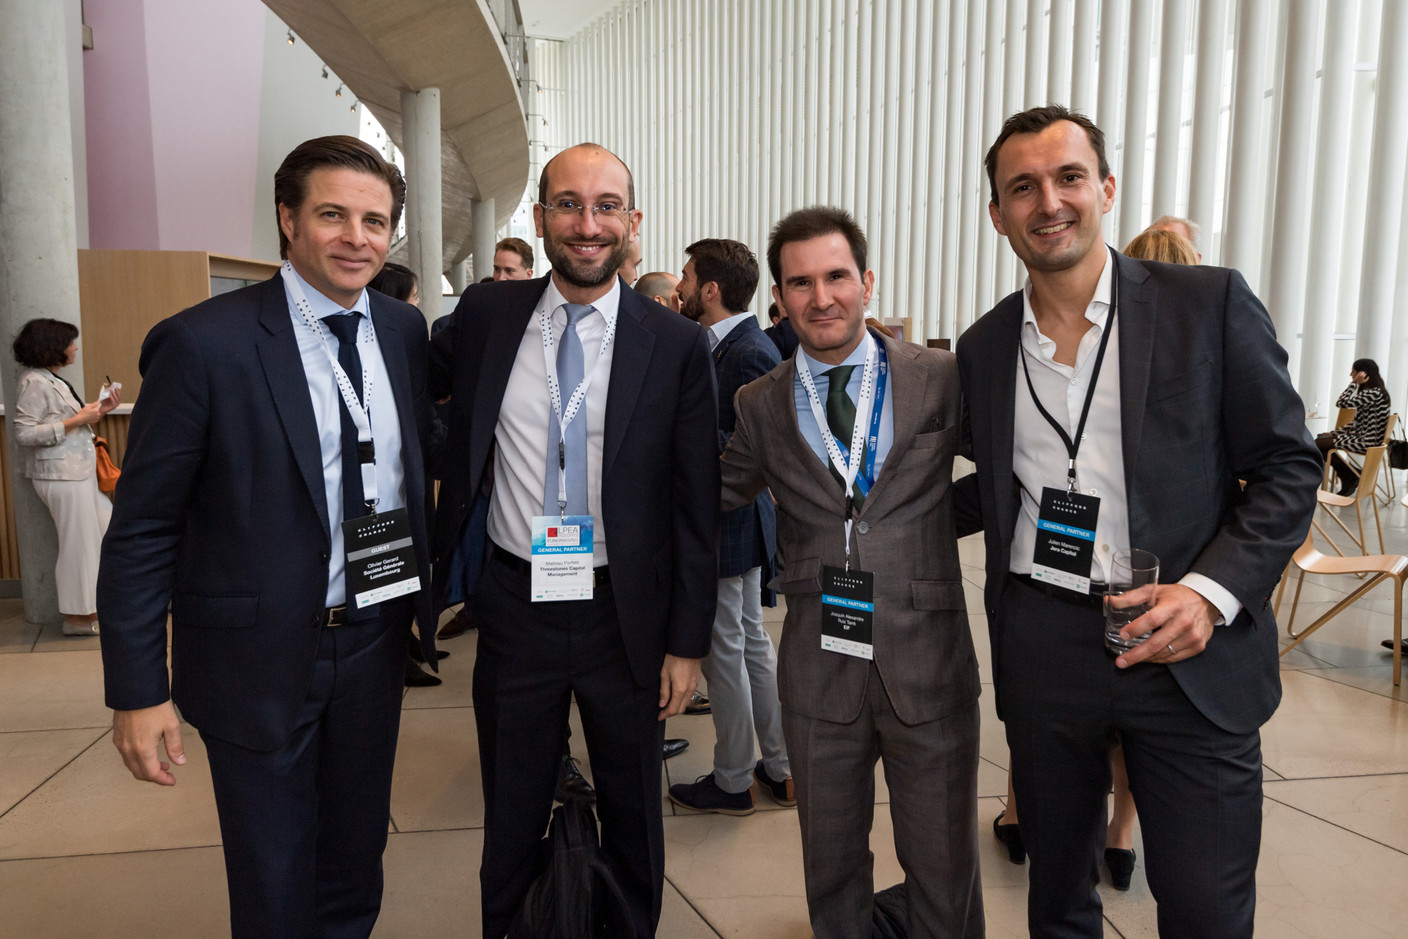 Olivier Gerard of Société Générale Luxembourg, Mathieu Perfetti of Threestones Capital Management, Joaquin Alexandre Ruiz Tarré of the European Investment Fund and Julien Marencic of Jera Capital. Photo: Nader Ghavami